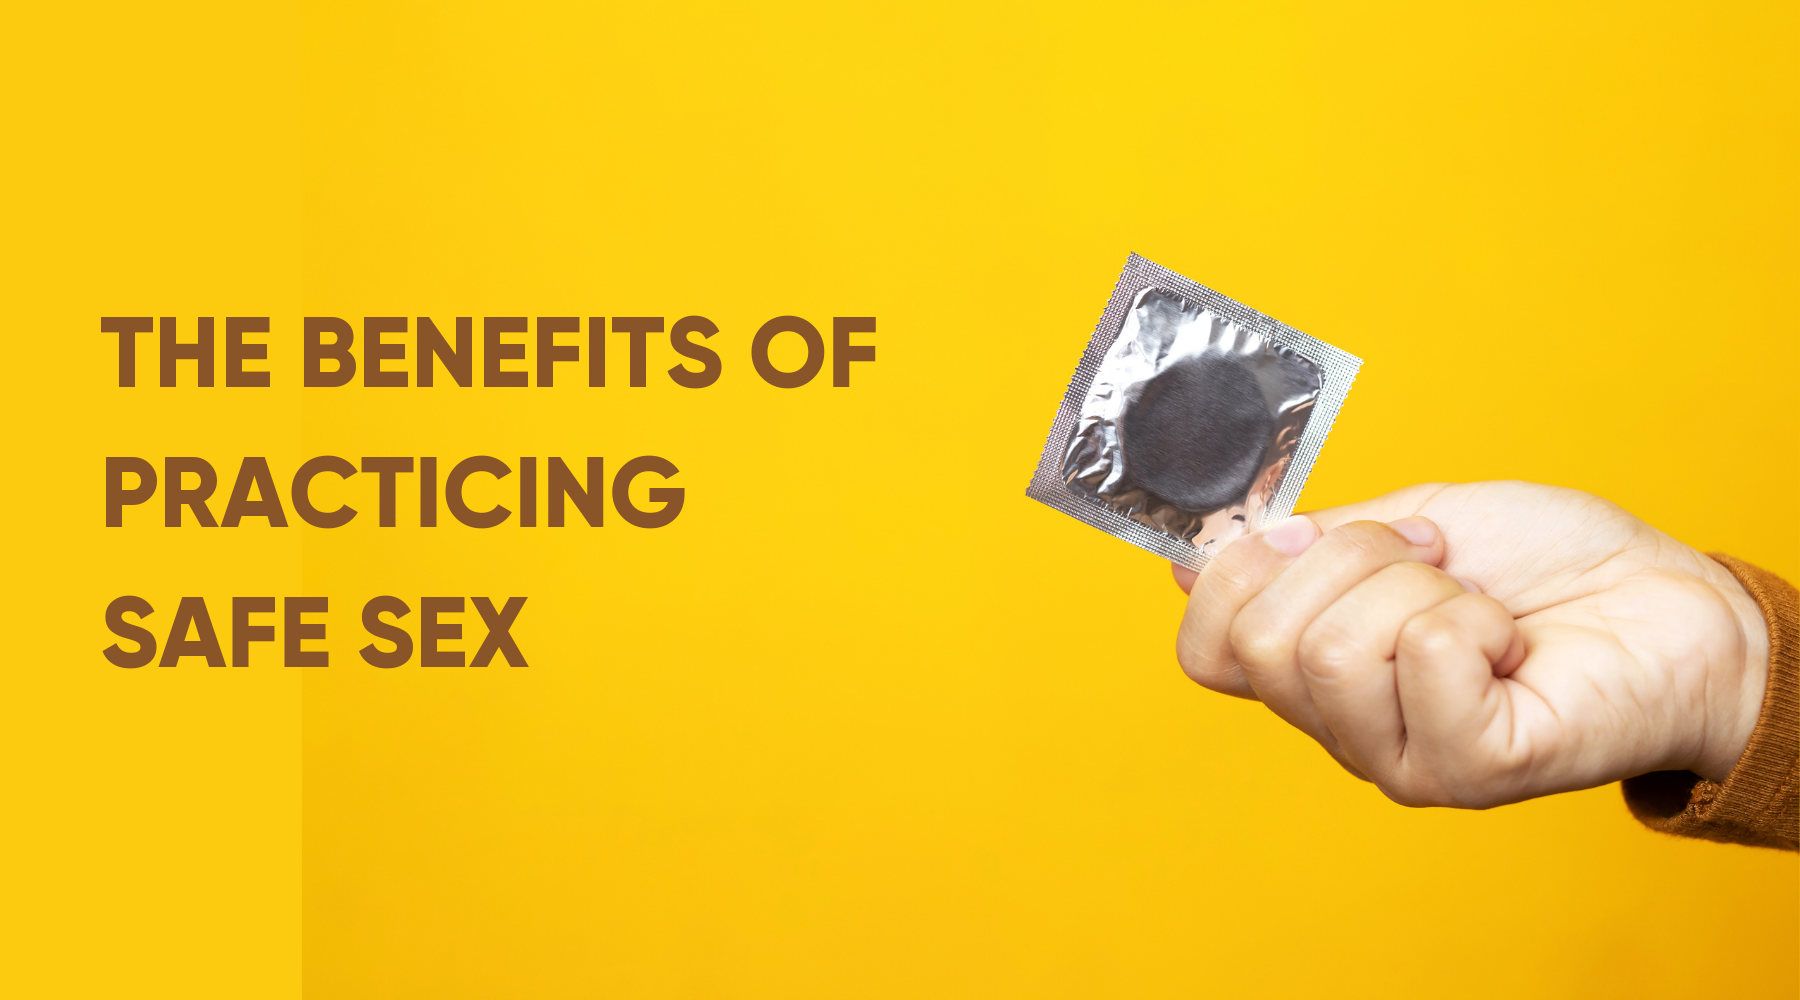 THE BENEFITS OF PRACTICING SAFE SEX